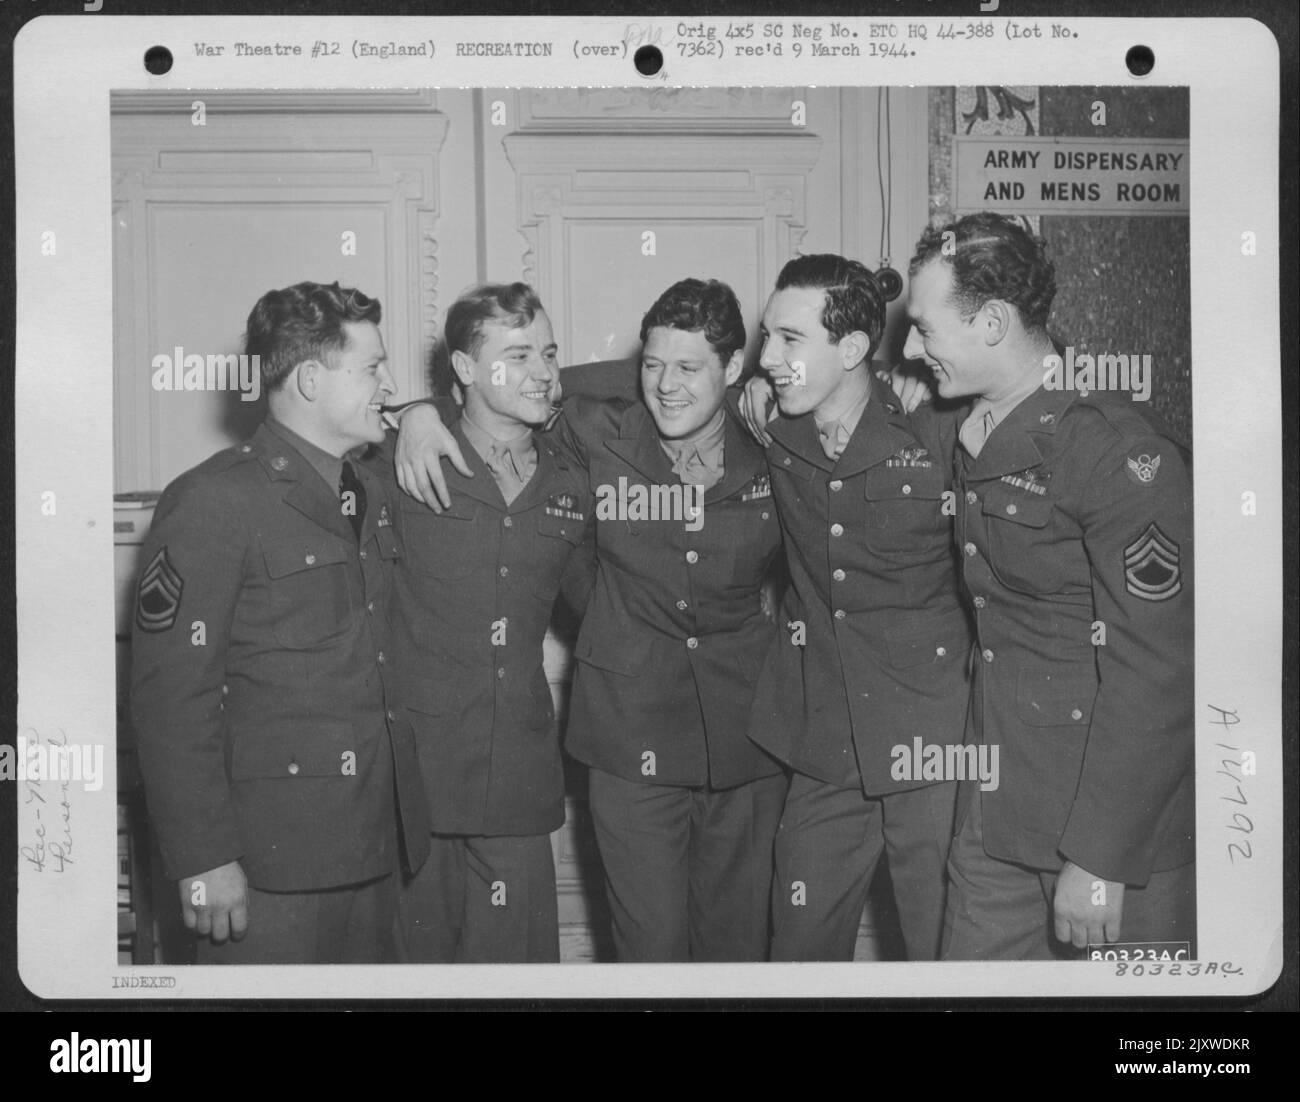 Buddies From A Squadron Of The Air Force, Who Had Finished Their Operational Missions In The Eto, Were Welcomed Into The Happy Warrior'S Club At A Party In A Red Cross Club In London, England On 12 January 1944. They Are, Left To Rigth: Sgt. Roger Palmer Stock Photo